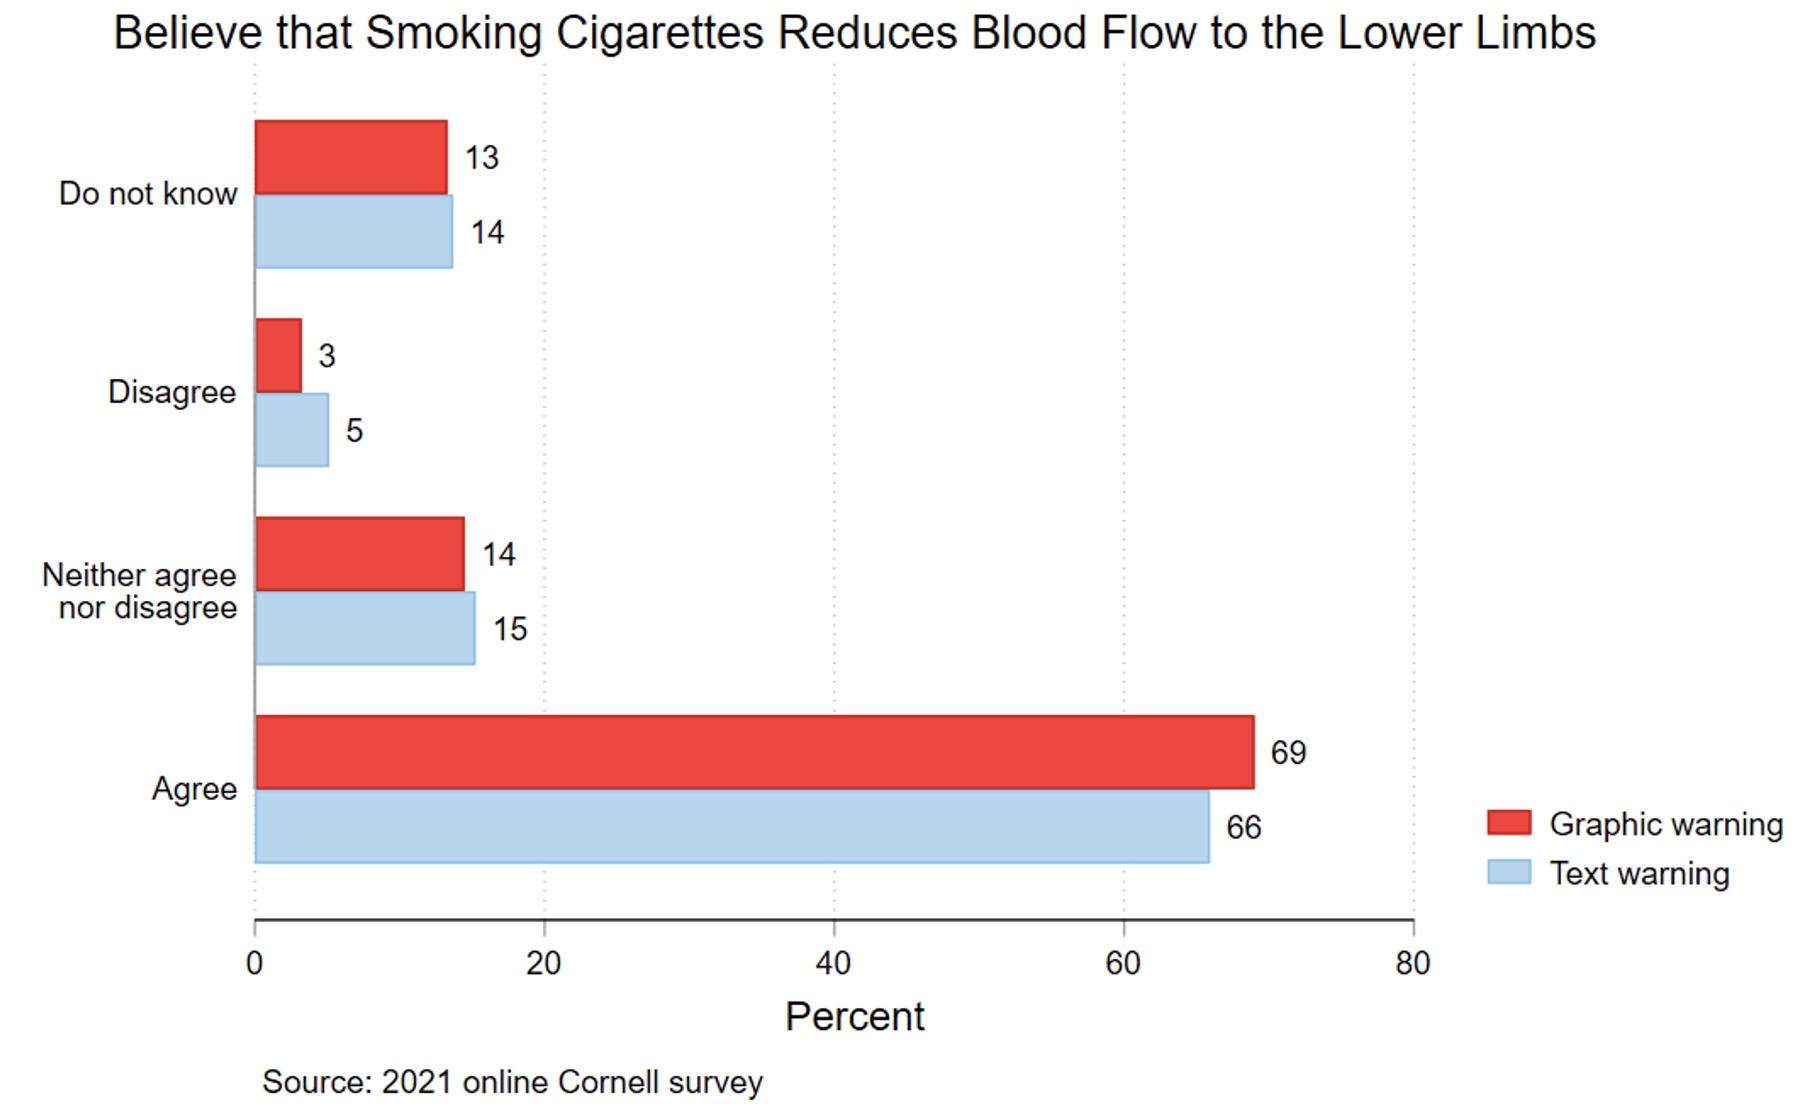 Figure 4 Believe smoking cigarettes reduces blood flow to the lower limbs, by warning type